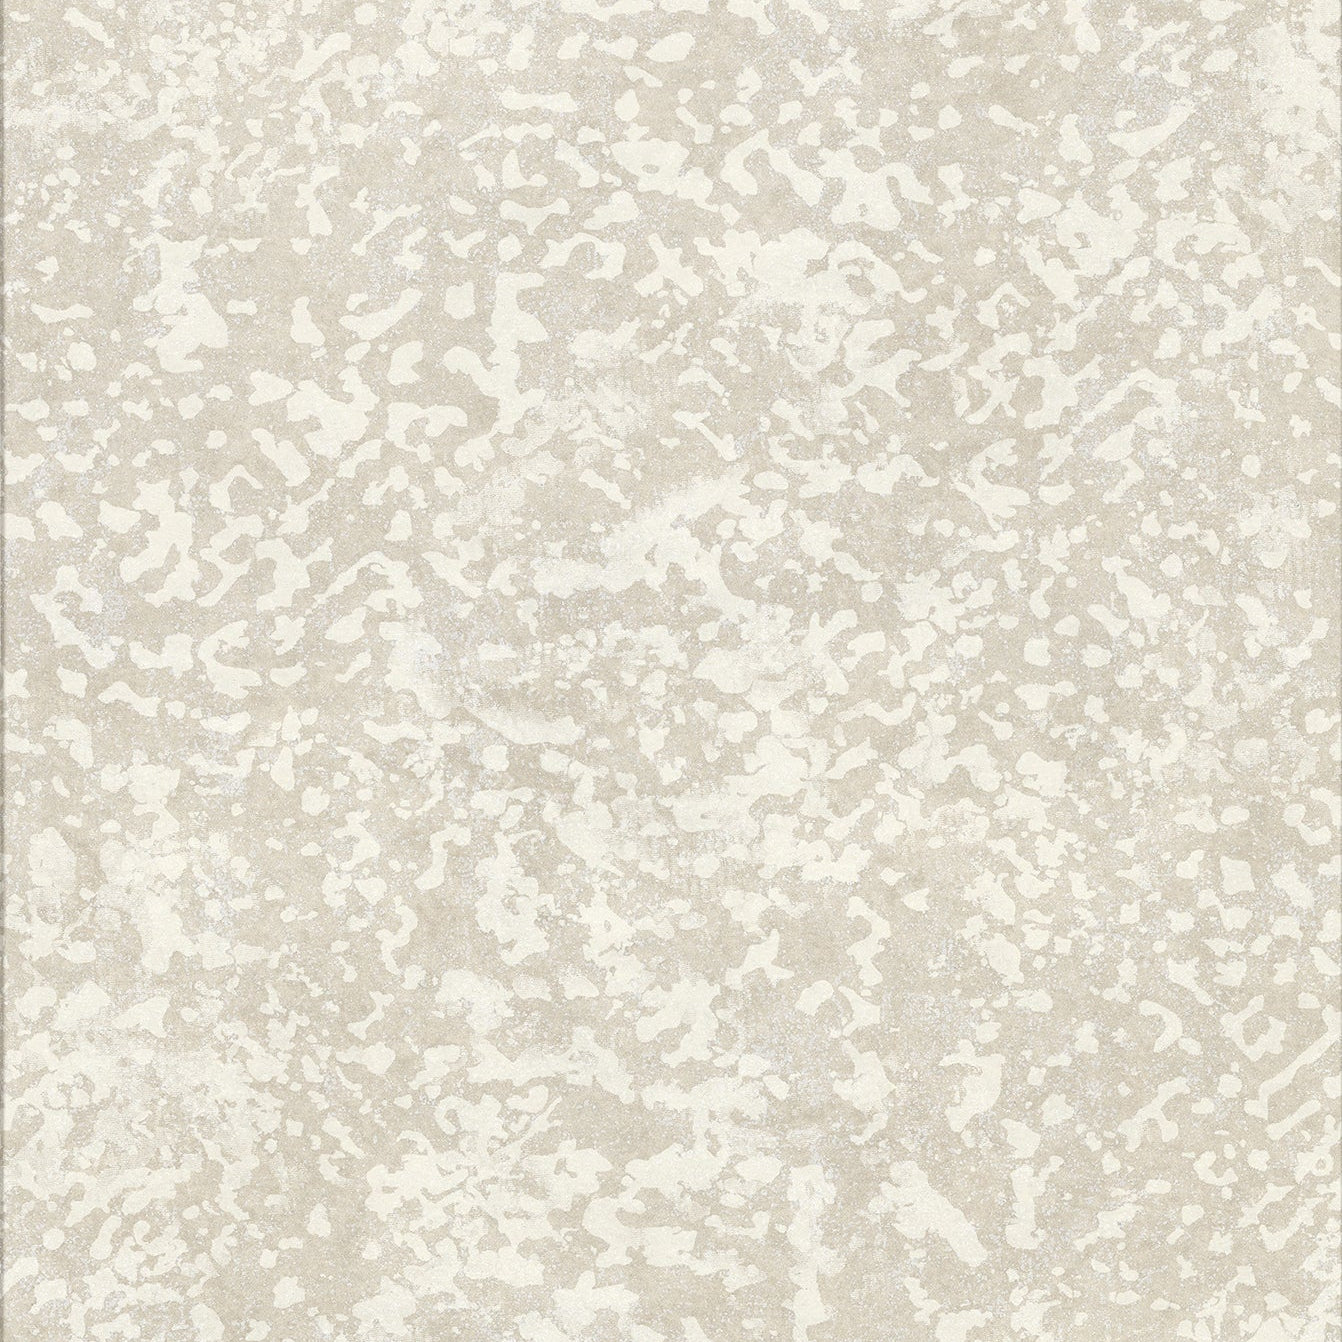 Looking 2959-AWMLC-131 Textural Essentials Carson Champagne Distressed Texture Champagne Brewster Wallpaper